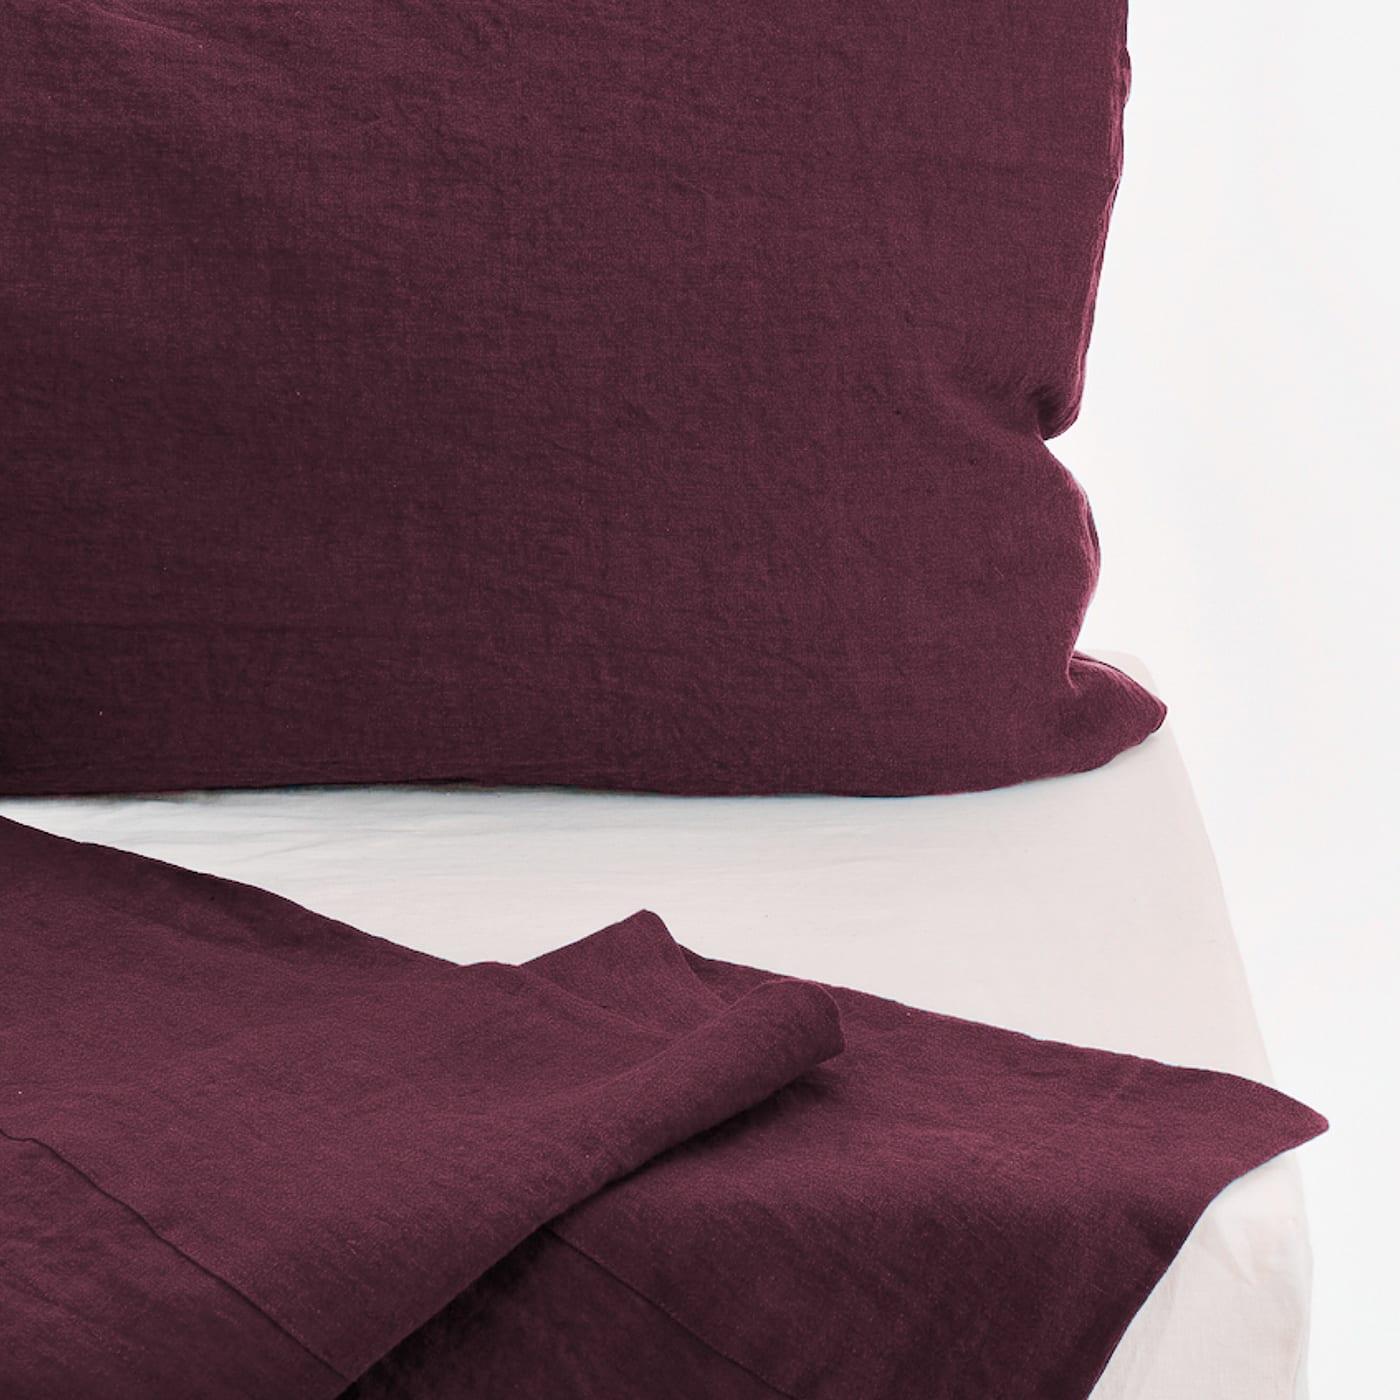 An elegant and colourful set entirely handmade of the finest linen, this set comprises a top sheet with matching pillowcases dyed in a sophisticated purple, and a white fitted sheet that will fit a 30 cm-deep mattress. The delicate hue of purple is